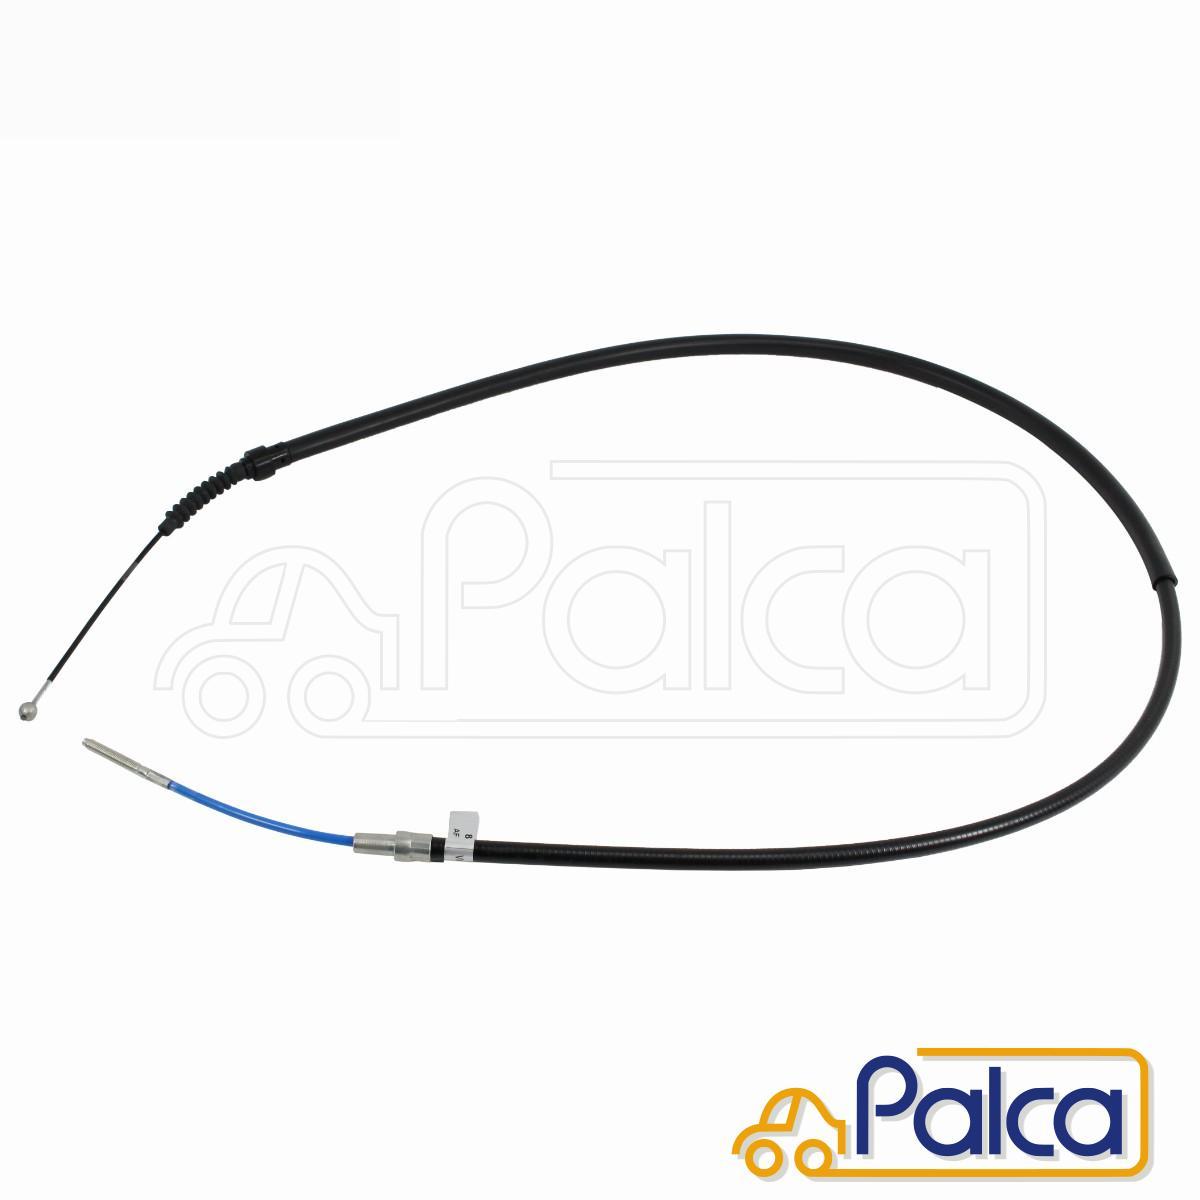  Volkswagen parking brake cable / side brake wire Golf 2/19PL | Jetta 2/16PL rotor for TRW made 191609721F